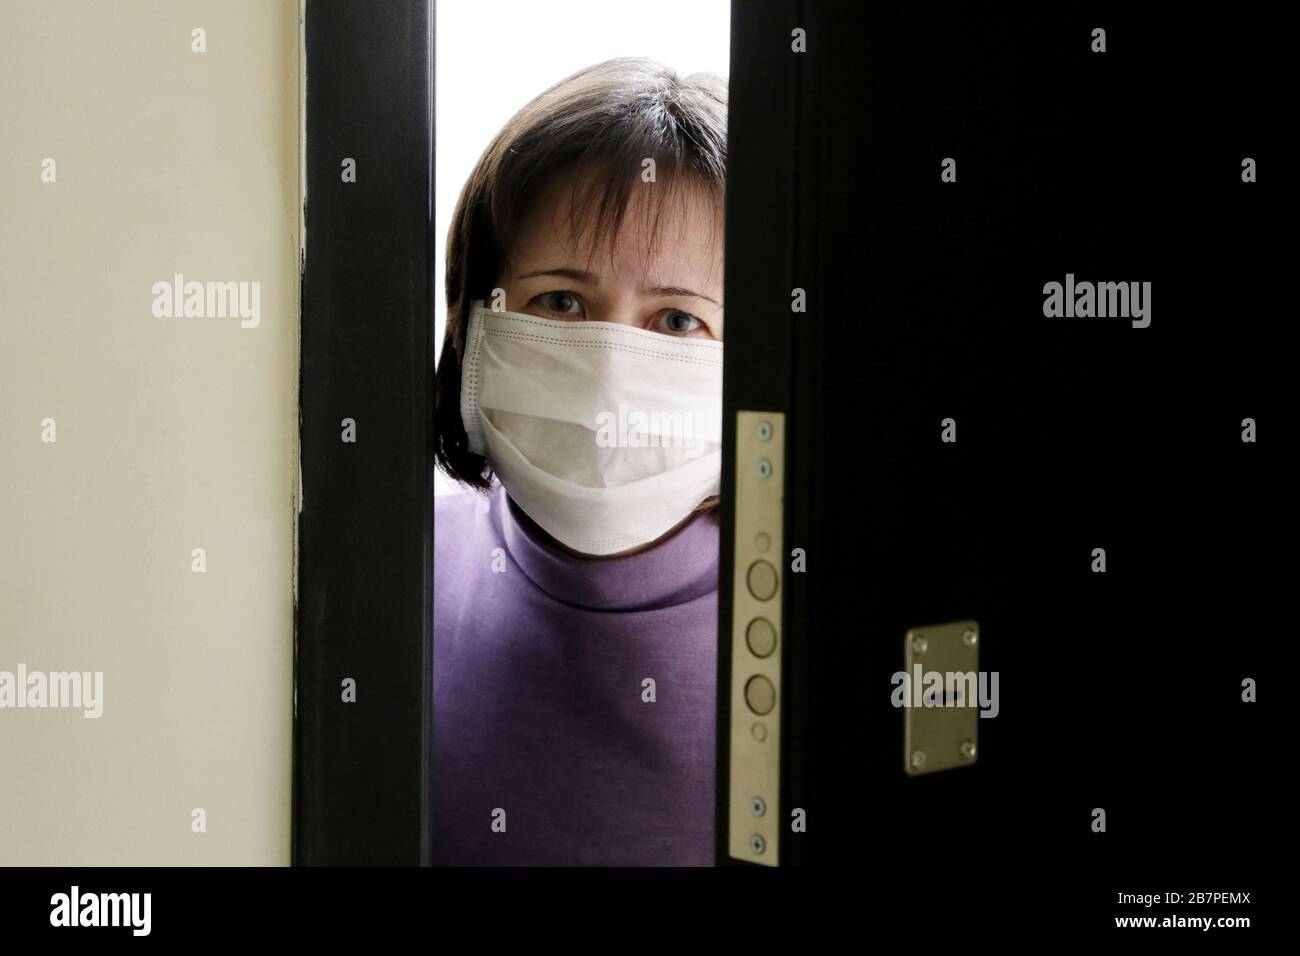 Home quarantine during the COVID-19 coronavirus epidemic. Worried woman in a medical mask standing in the open doorway Stock Photo